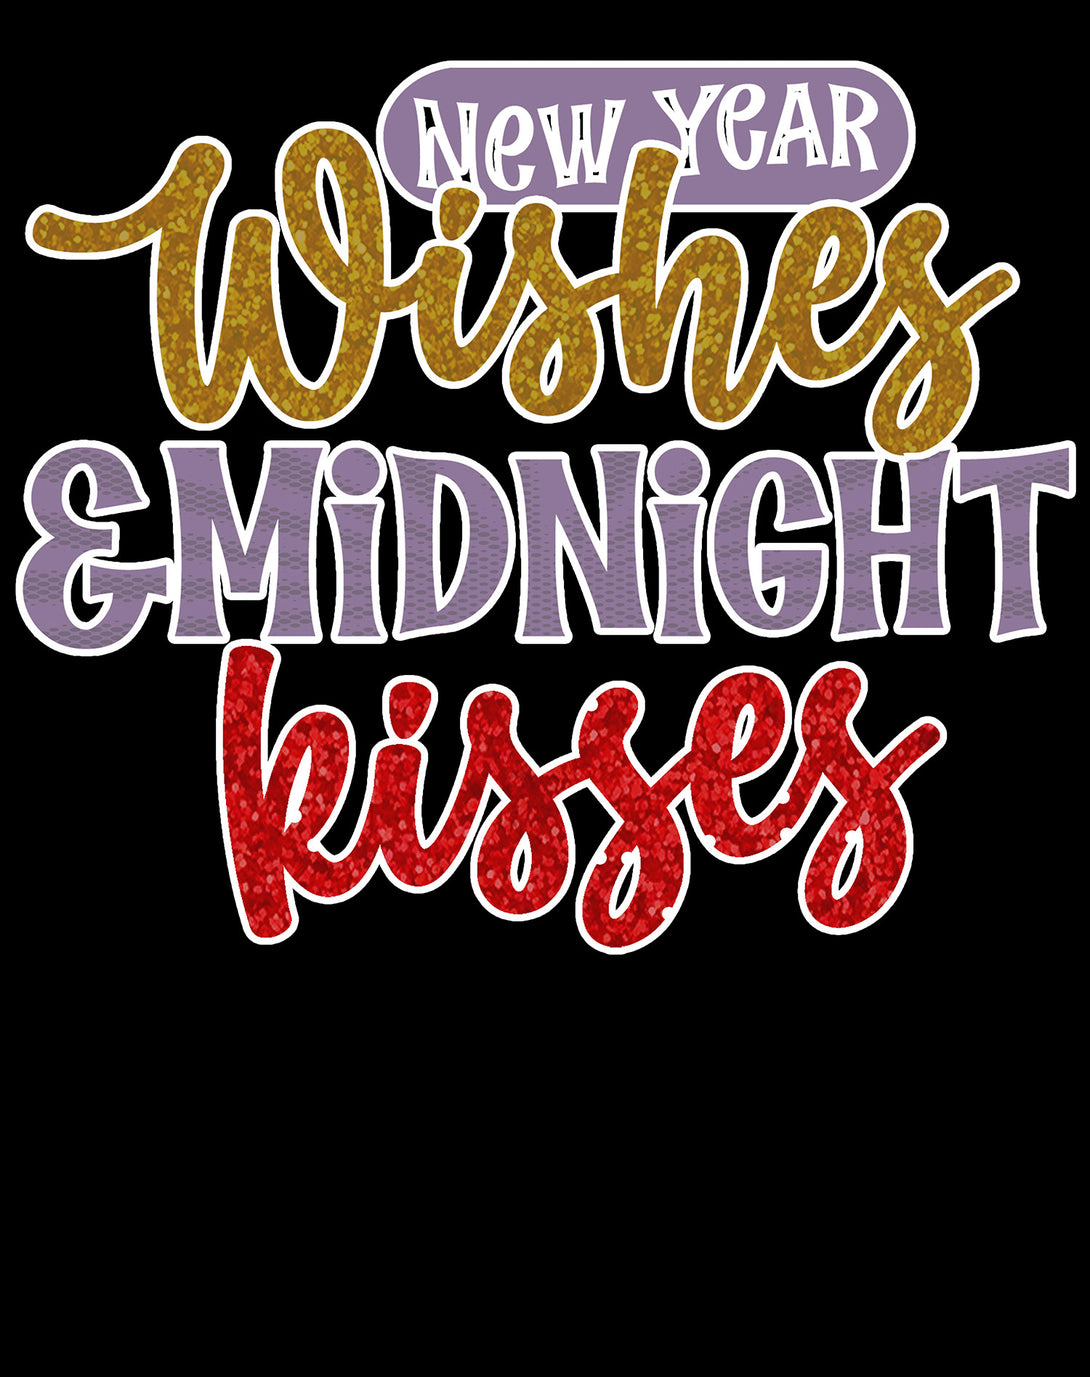 NYE New Year Wishes Midnight Kisses Eve Party Cute Couples Unisex Sweatshirt Black - Urban Species Design Close Up